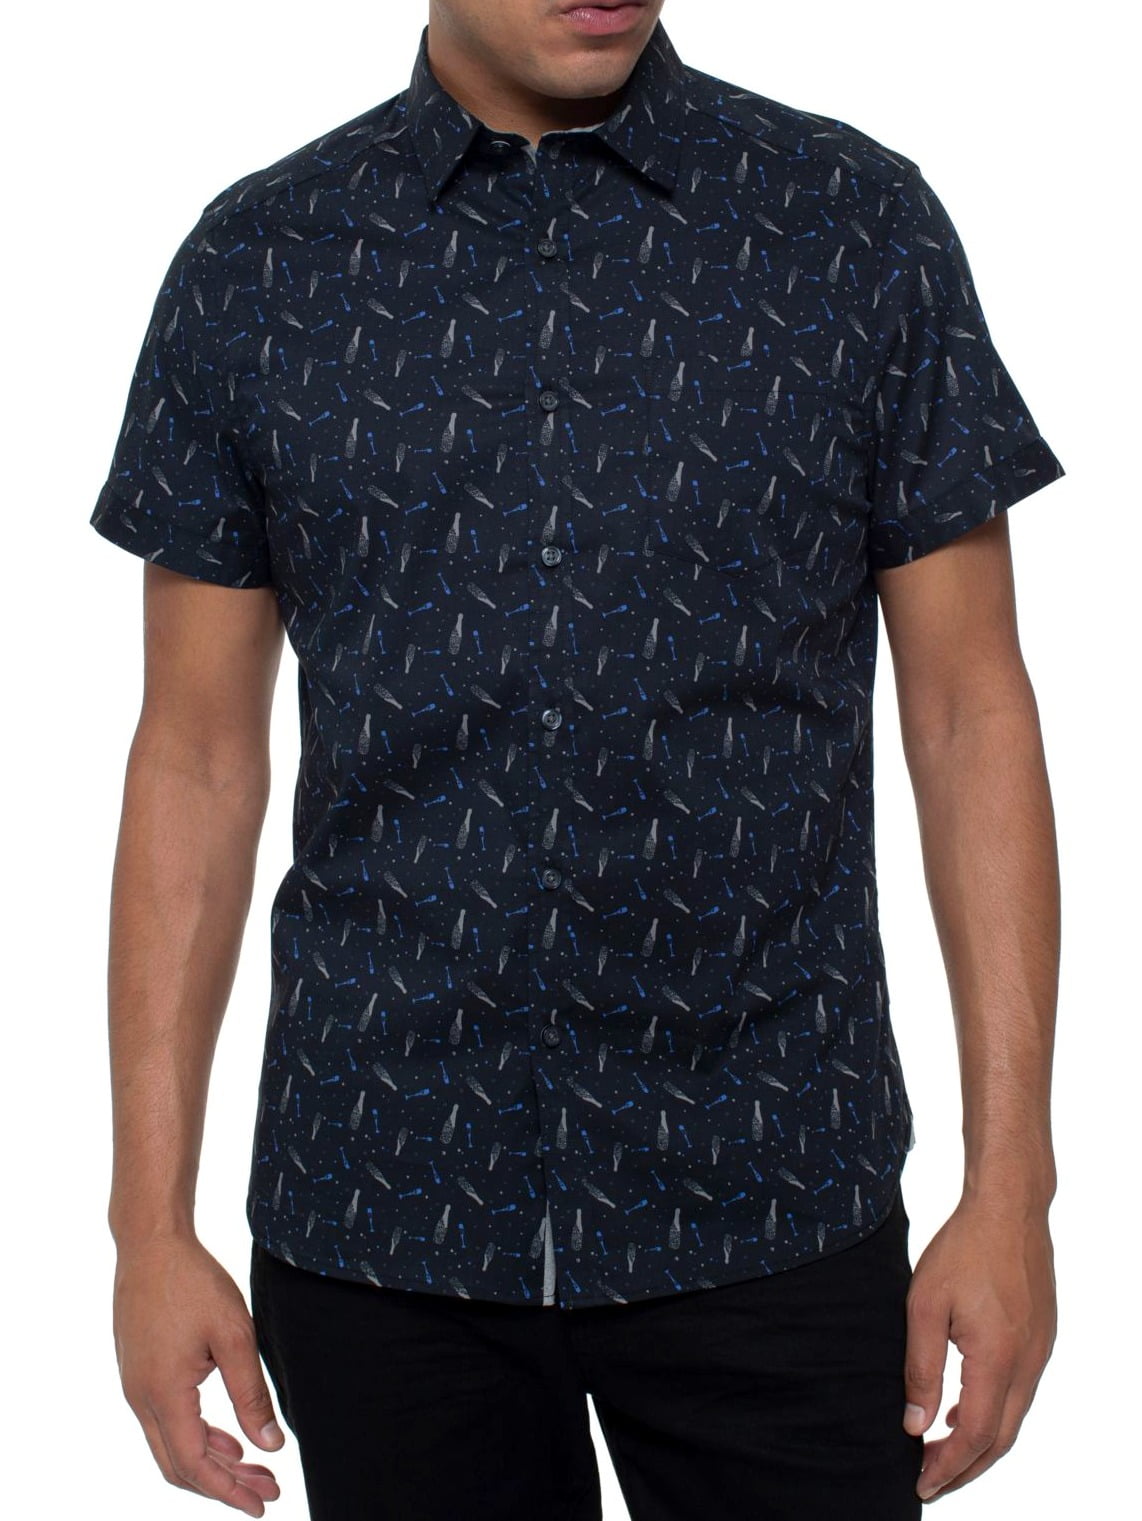 Kenneth Cole REACTION Mens Short Sleeve Colored Mini Triangle